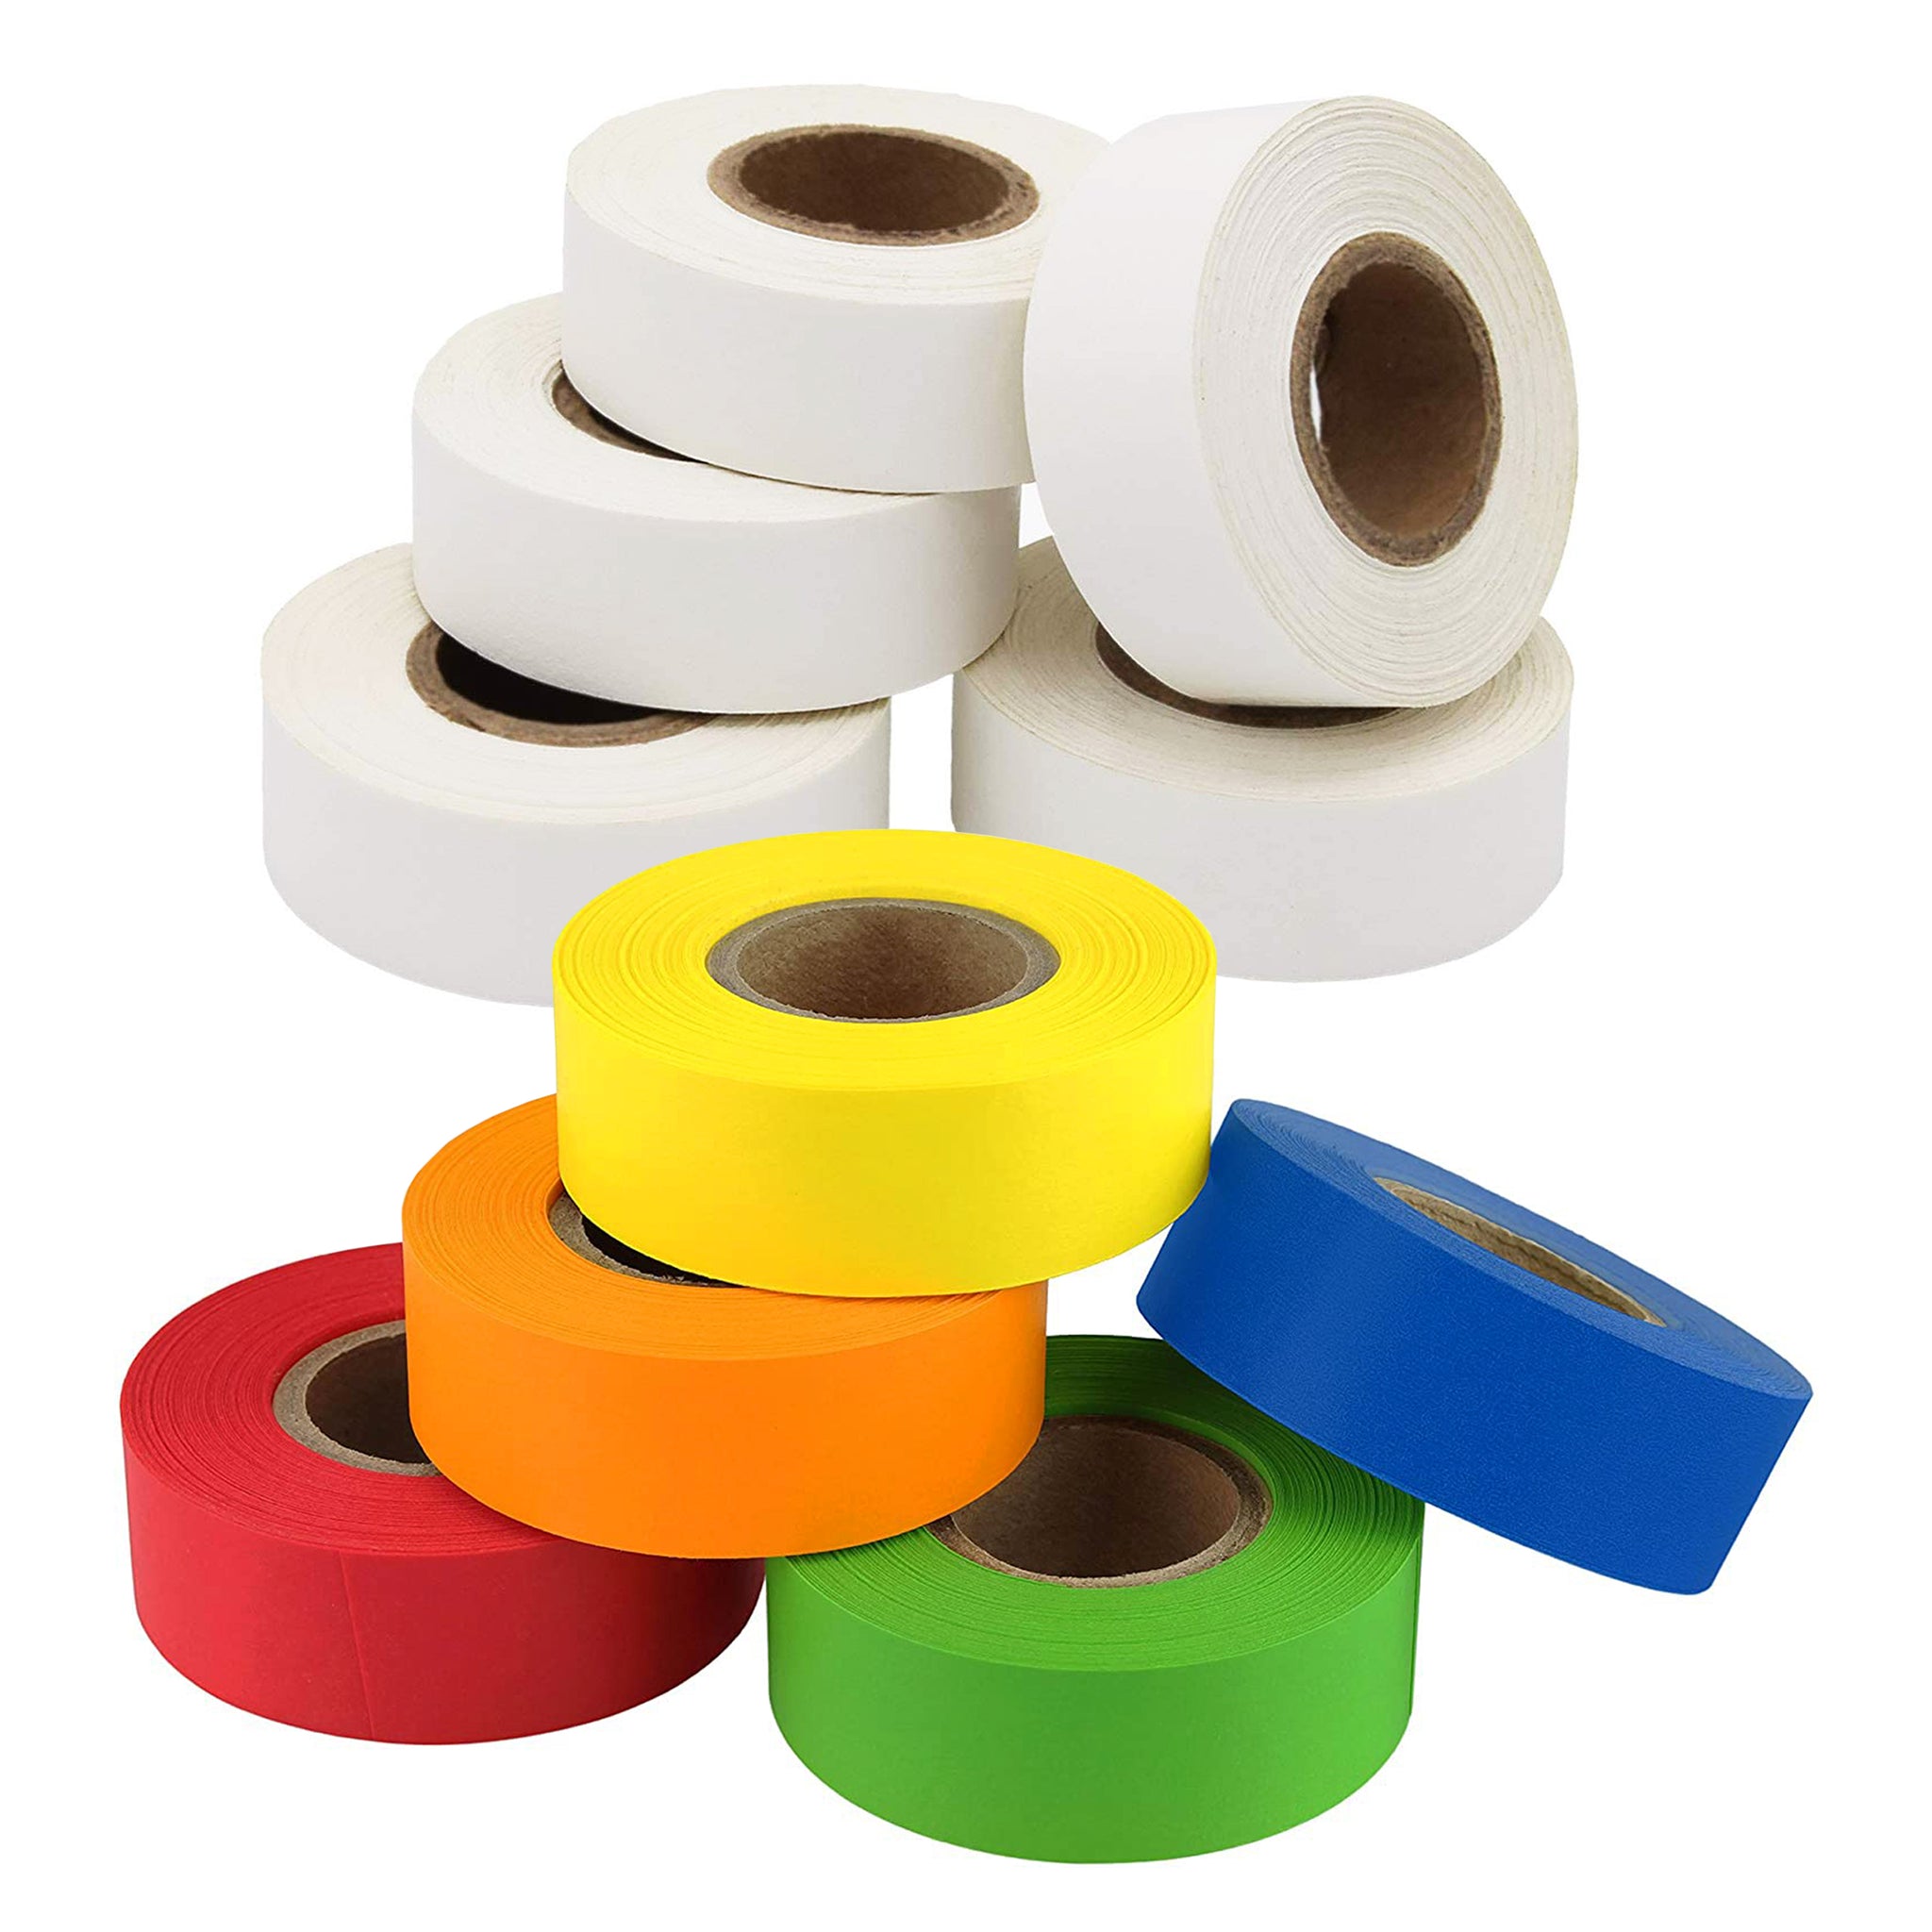 minliving Biodegradable Tape - 3/4 inches x 70 Yards [Clear]